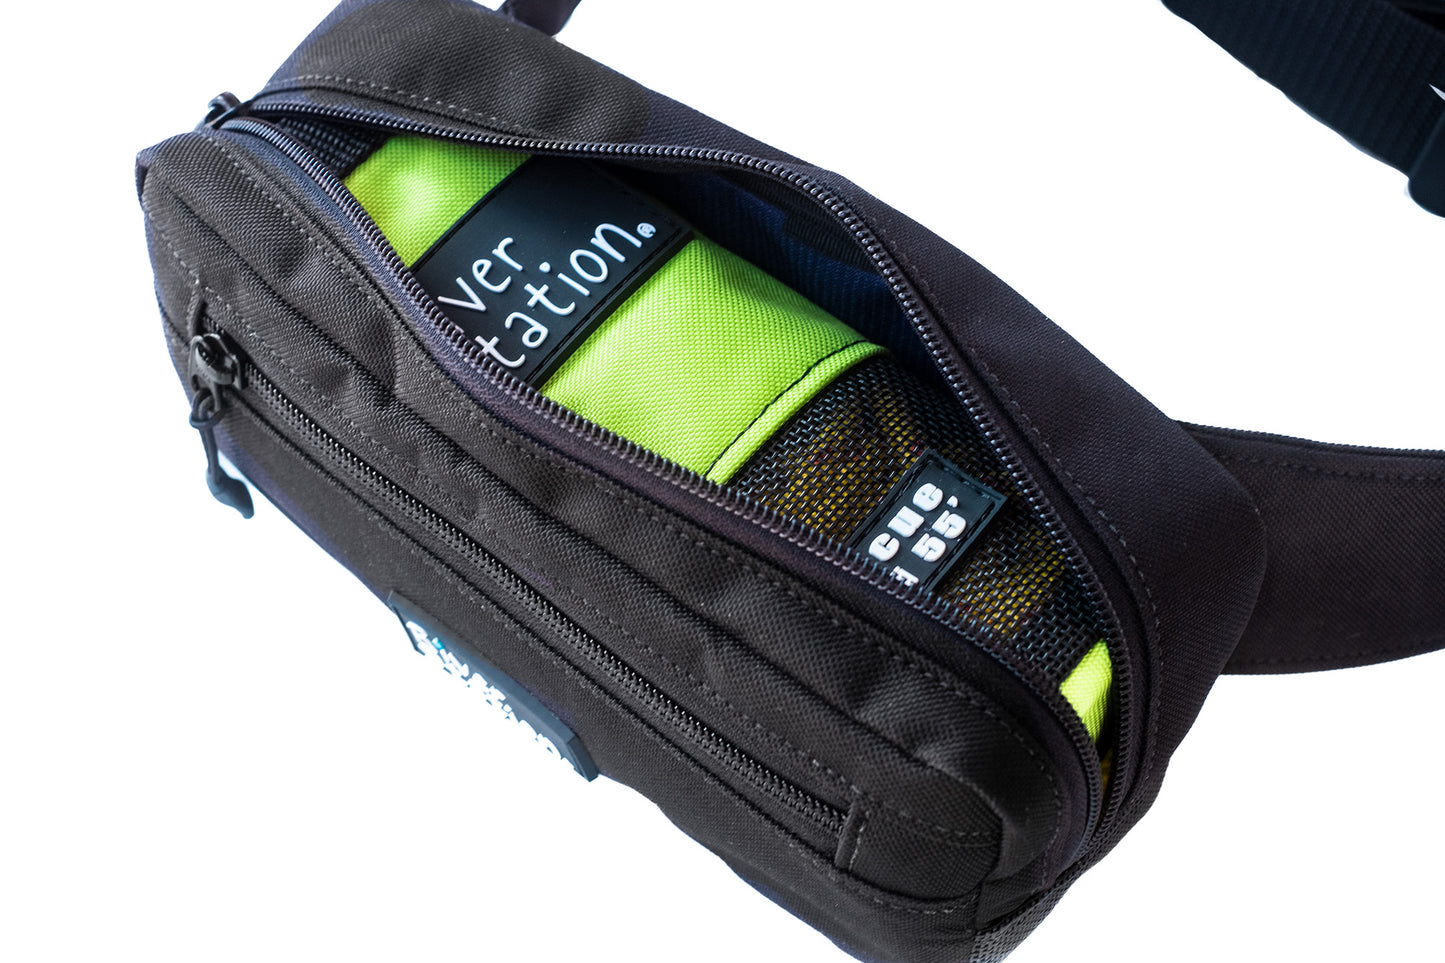 Black and green waist throw bag for whitewater.